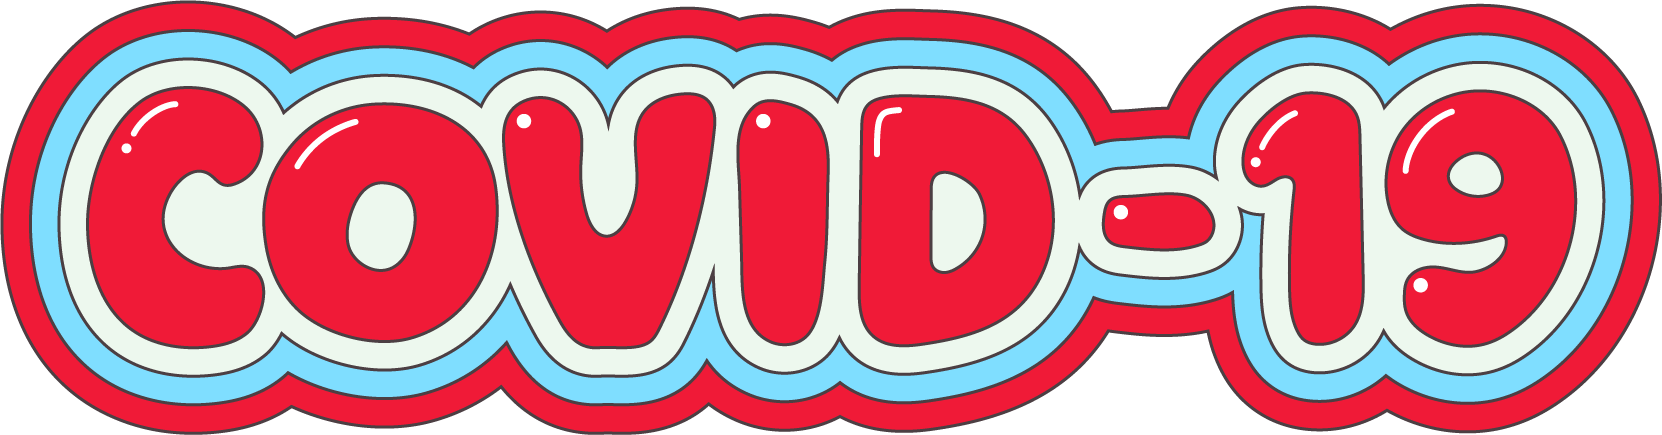 Stylized lettered "COVID-19" with multi-colored outline